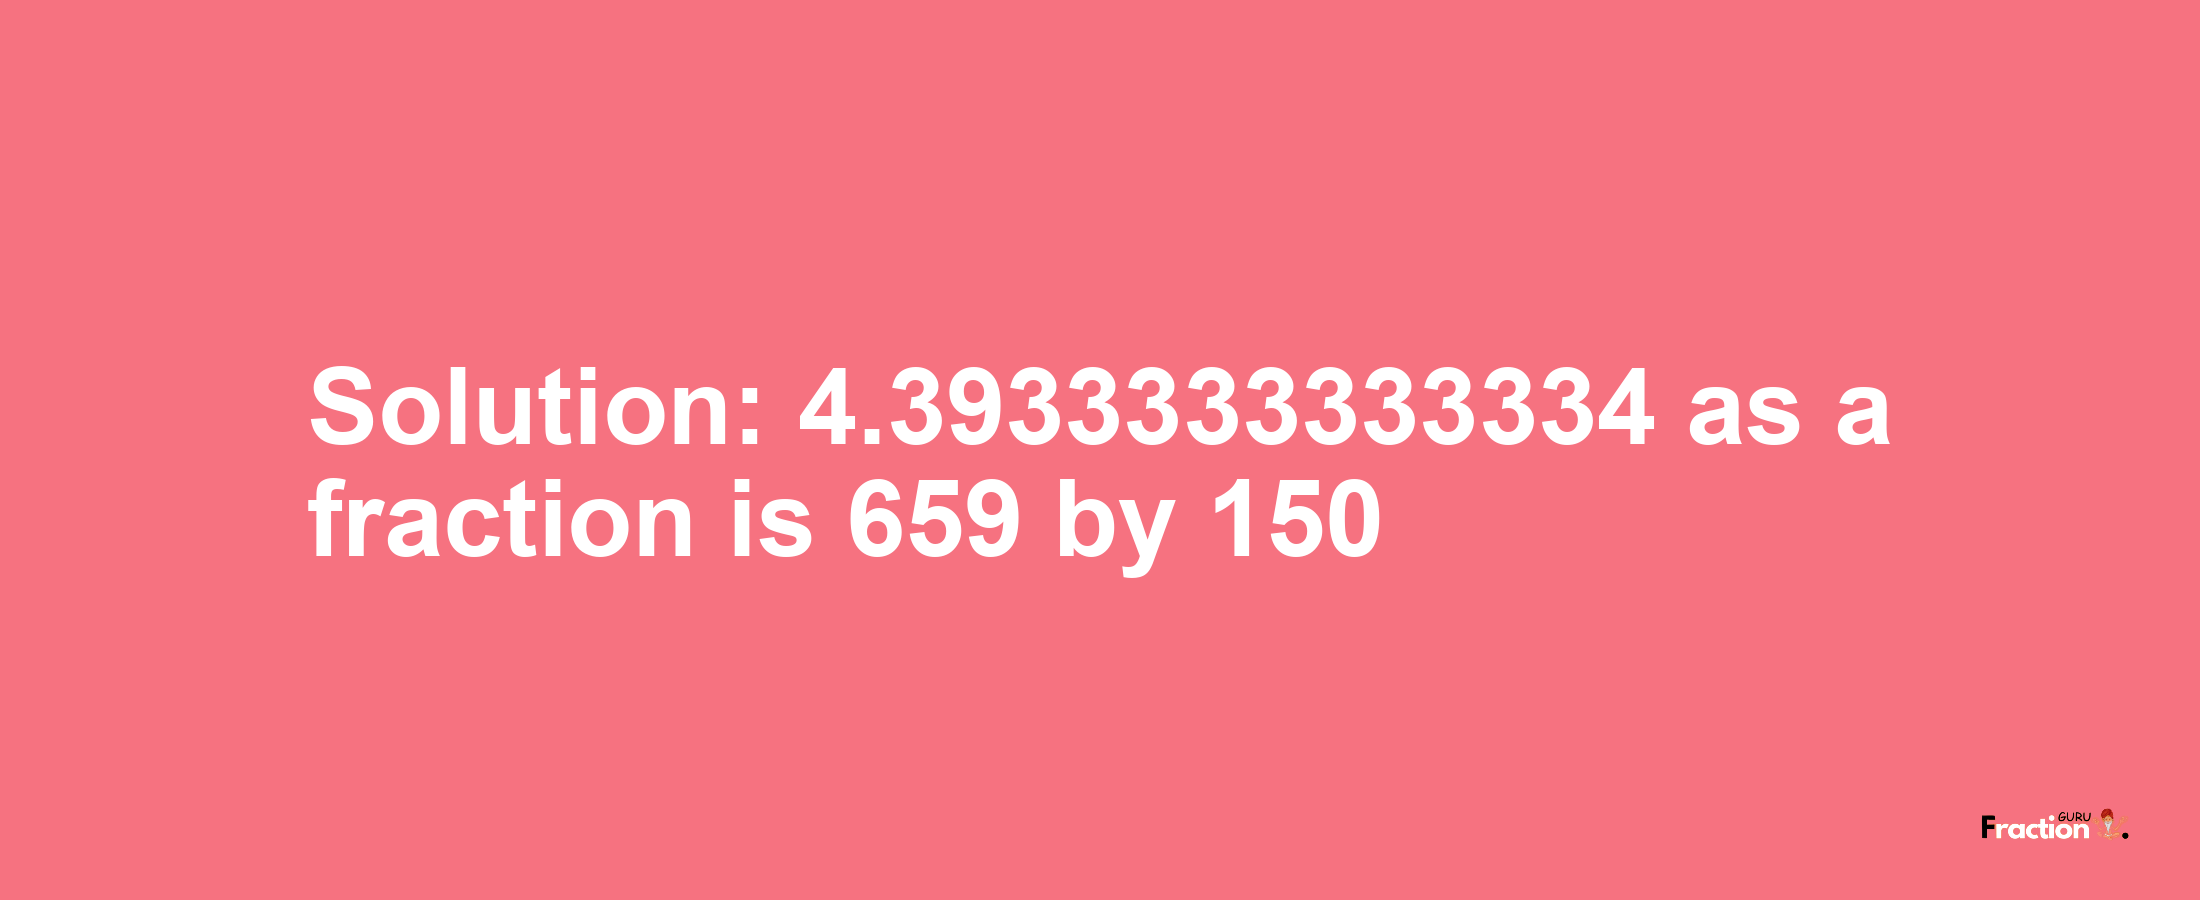 Solution:4.3933333333334 as a fraction is 659/150